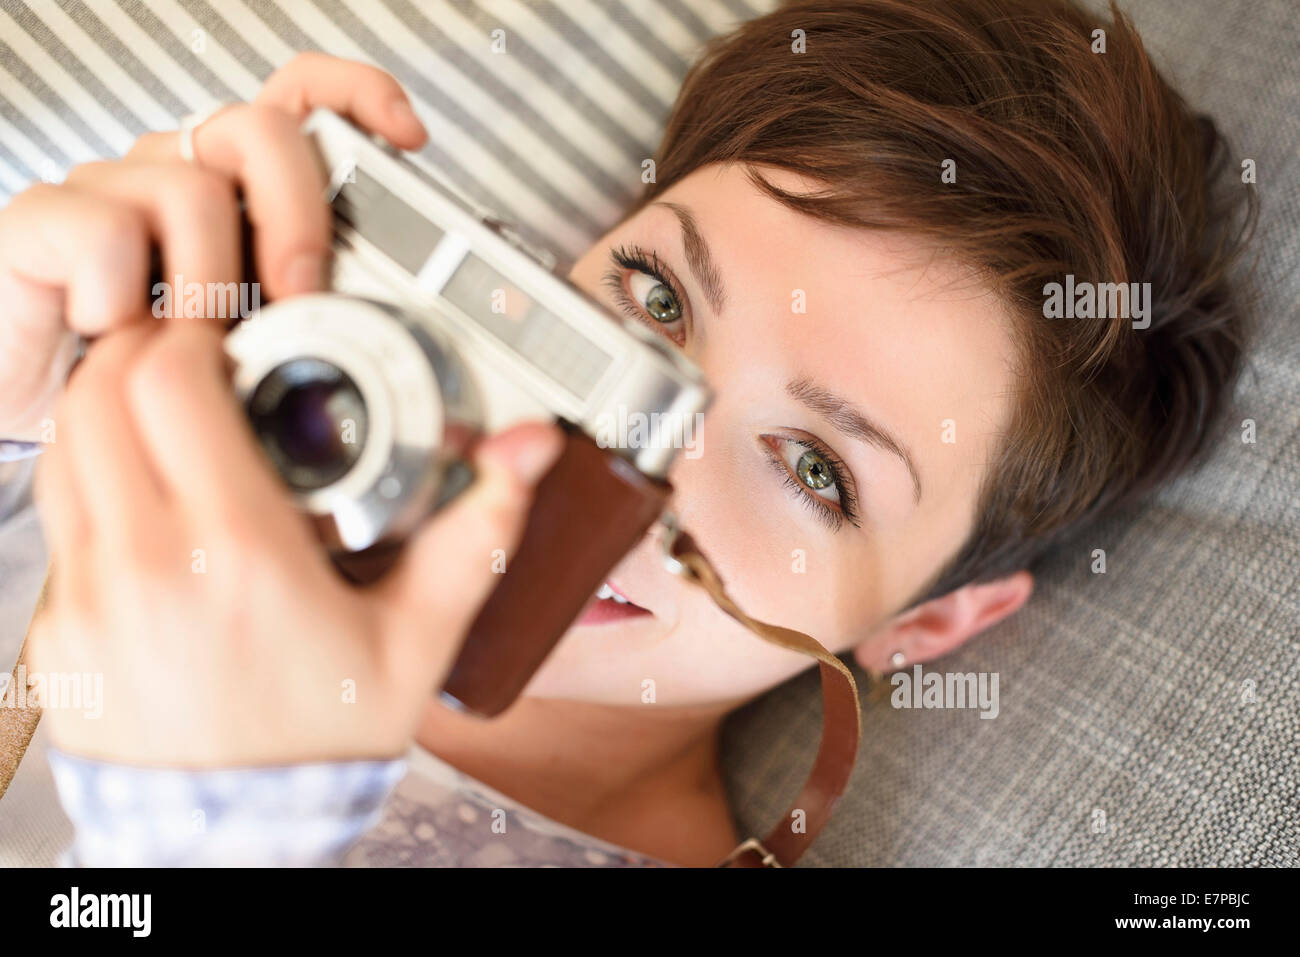 Portrait of young woman holding old fashioned camera Stock Photo